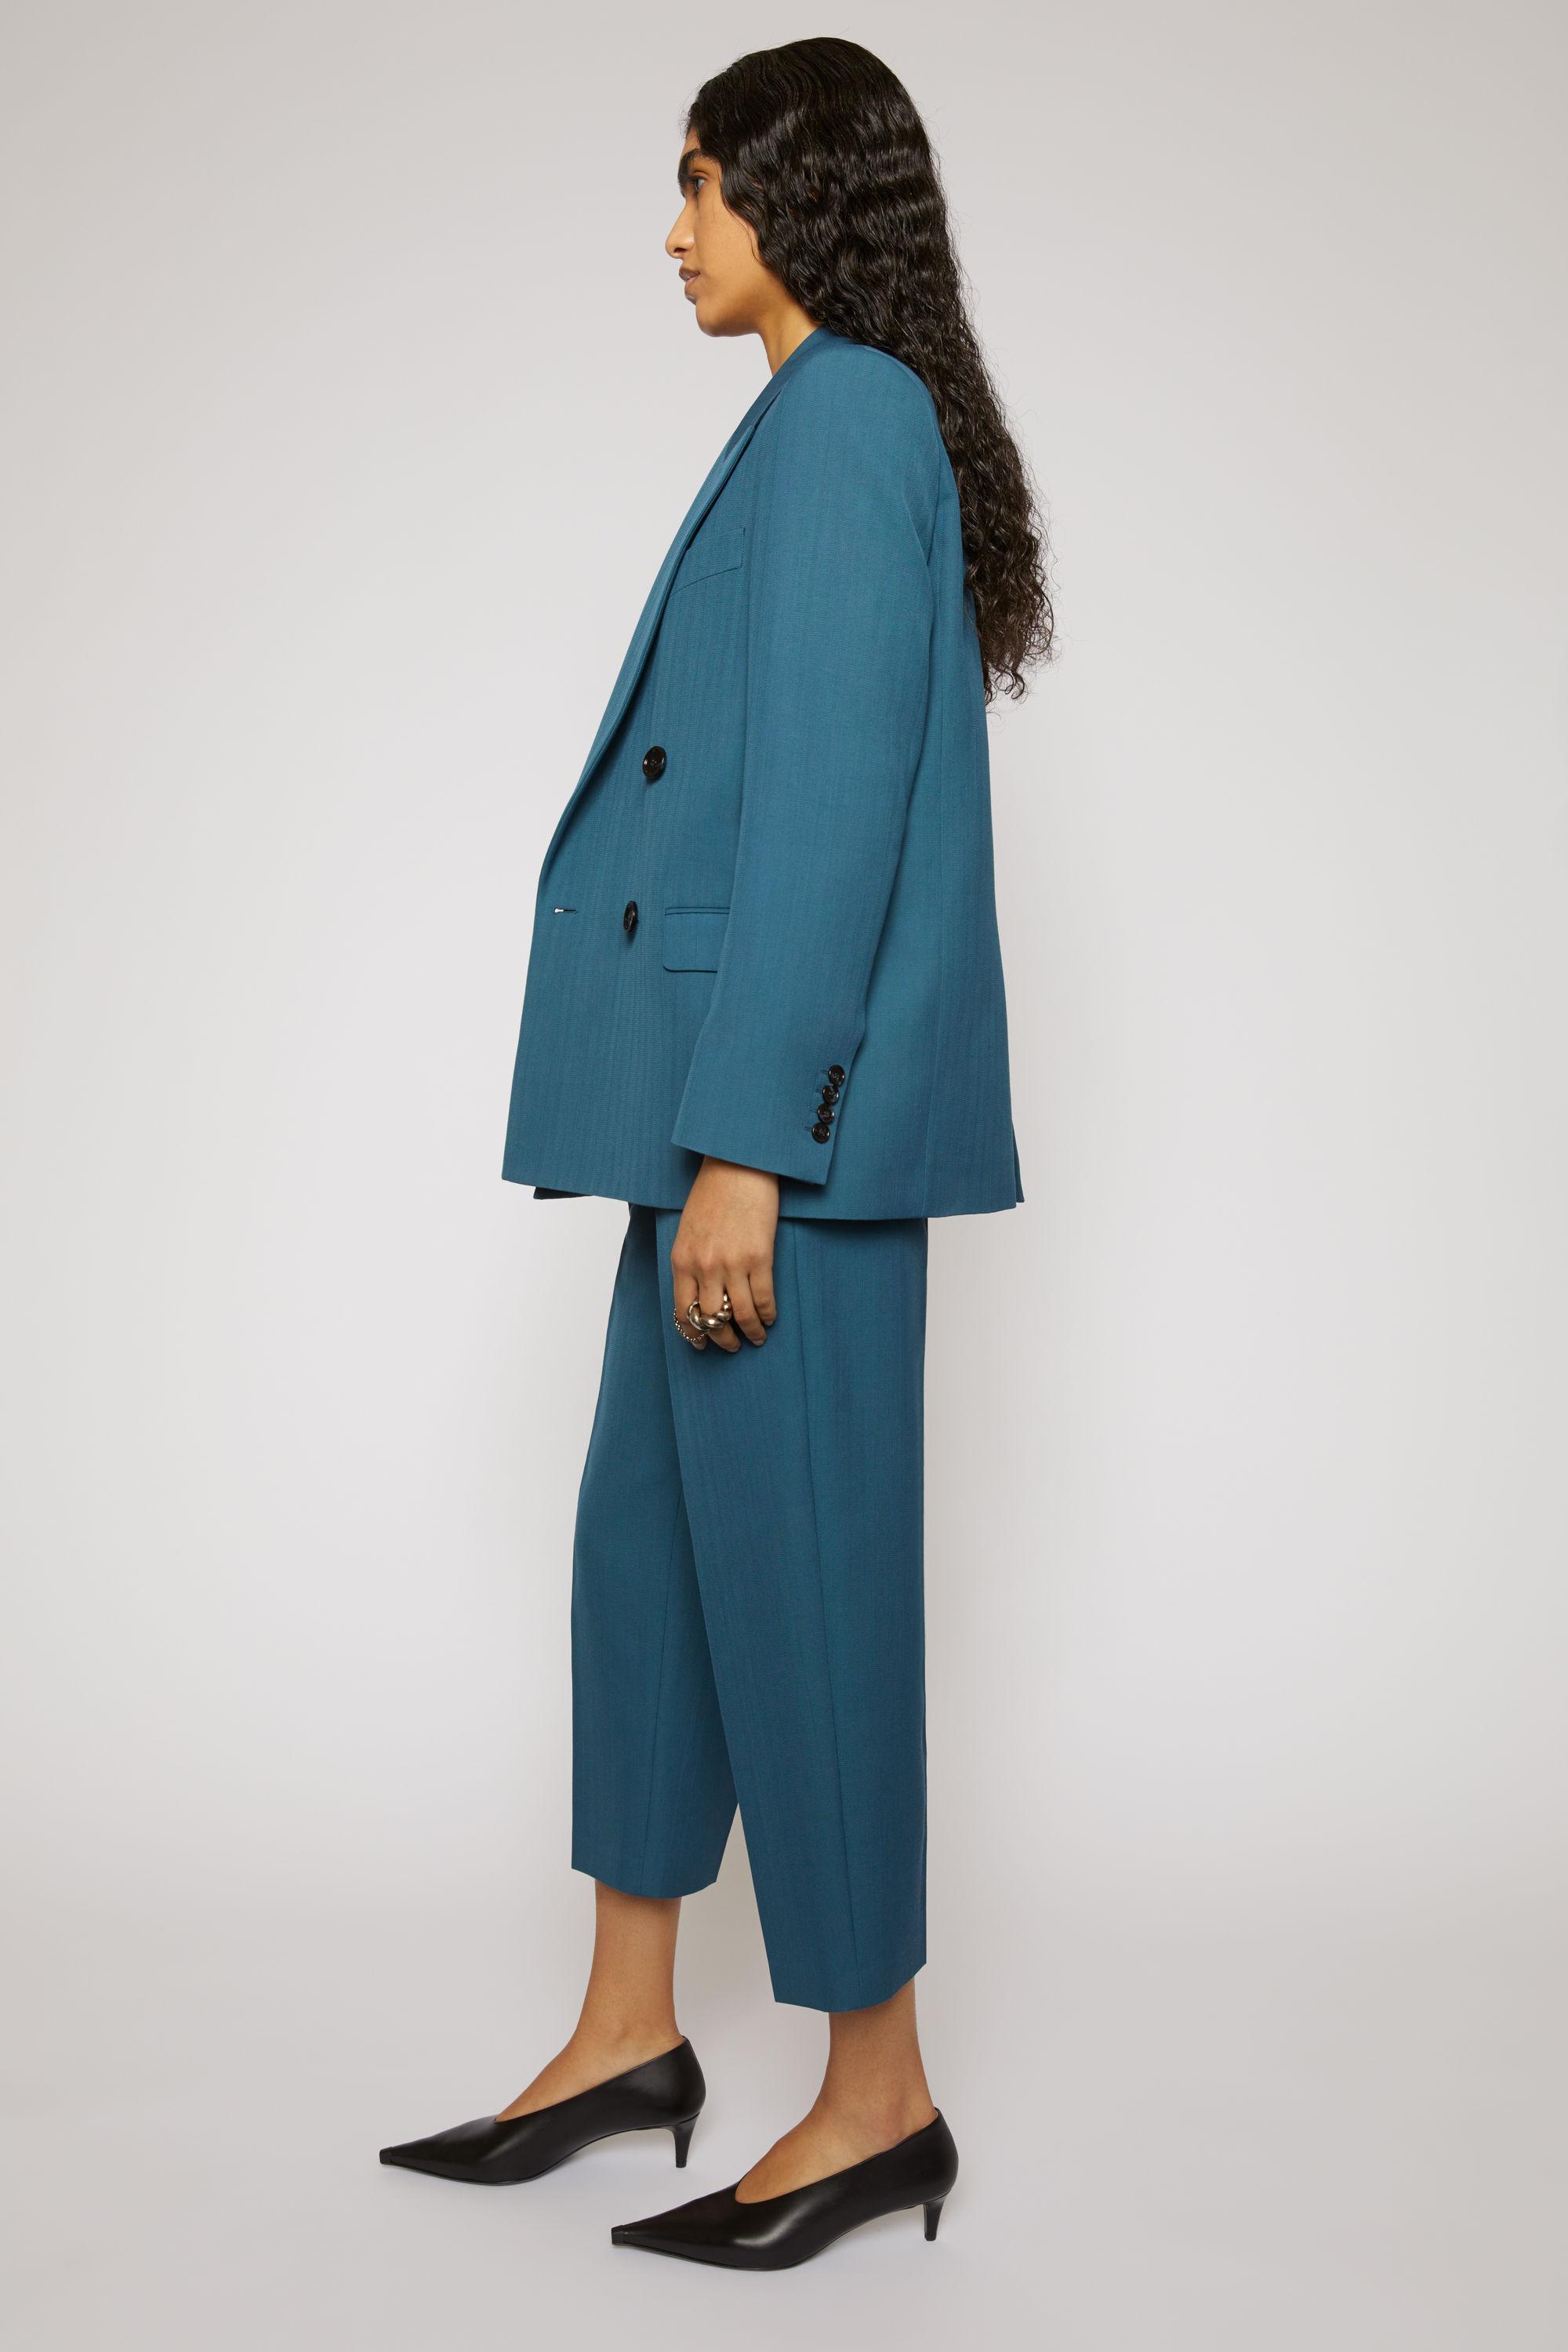 Acne Studios Fn-wn-suit000175 Teal Blue Double-breasted Suit Jacket | Lyst